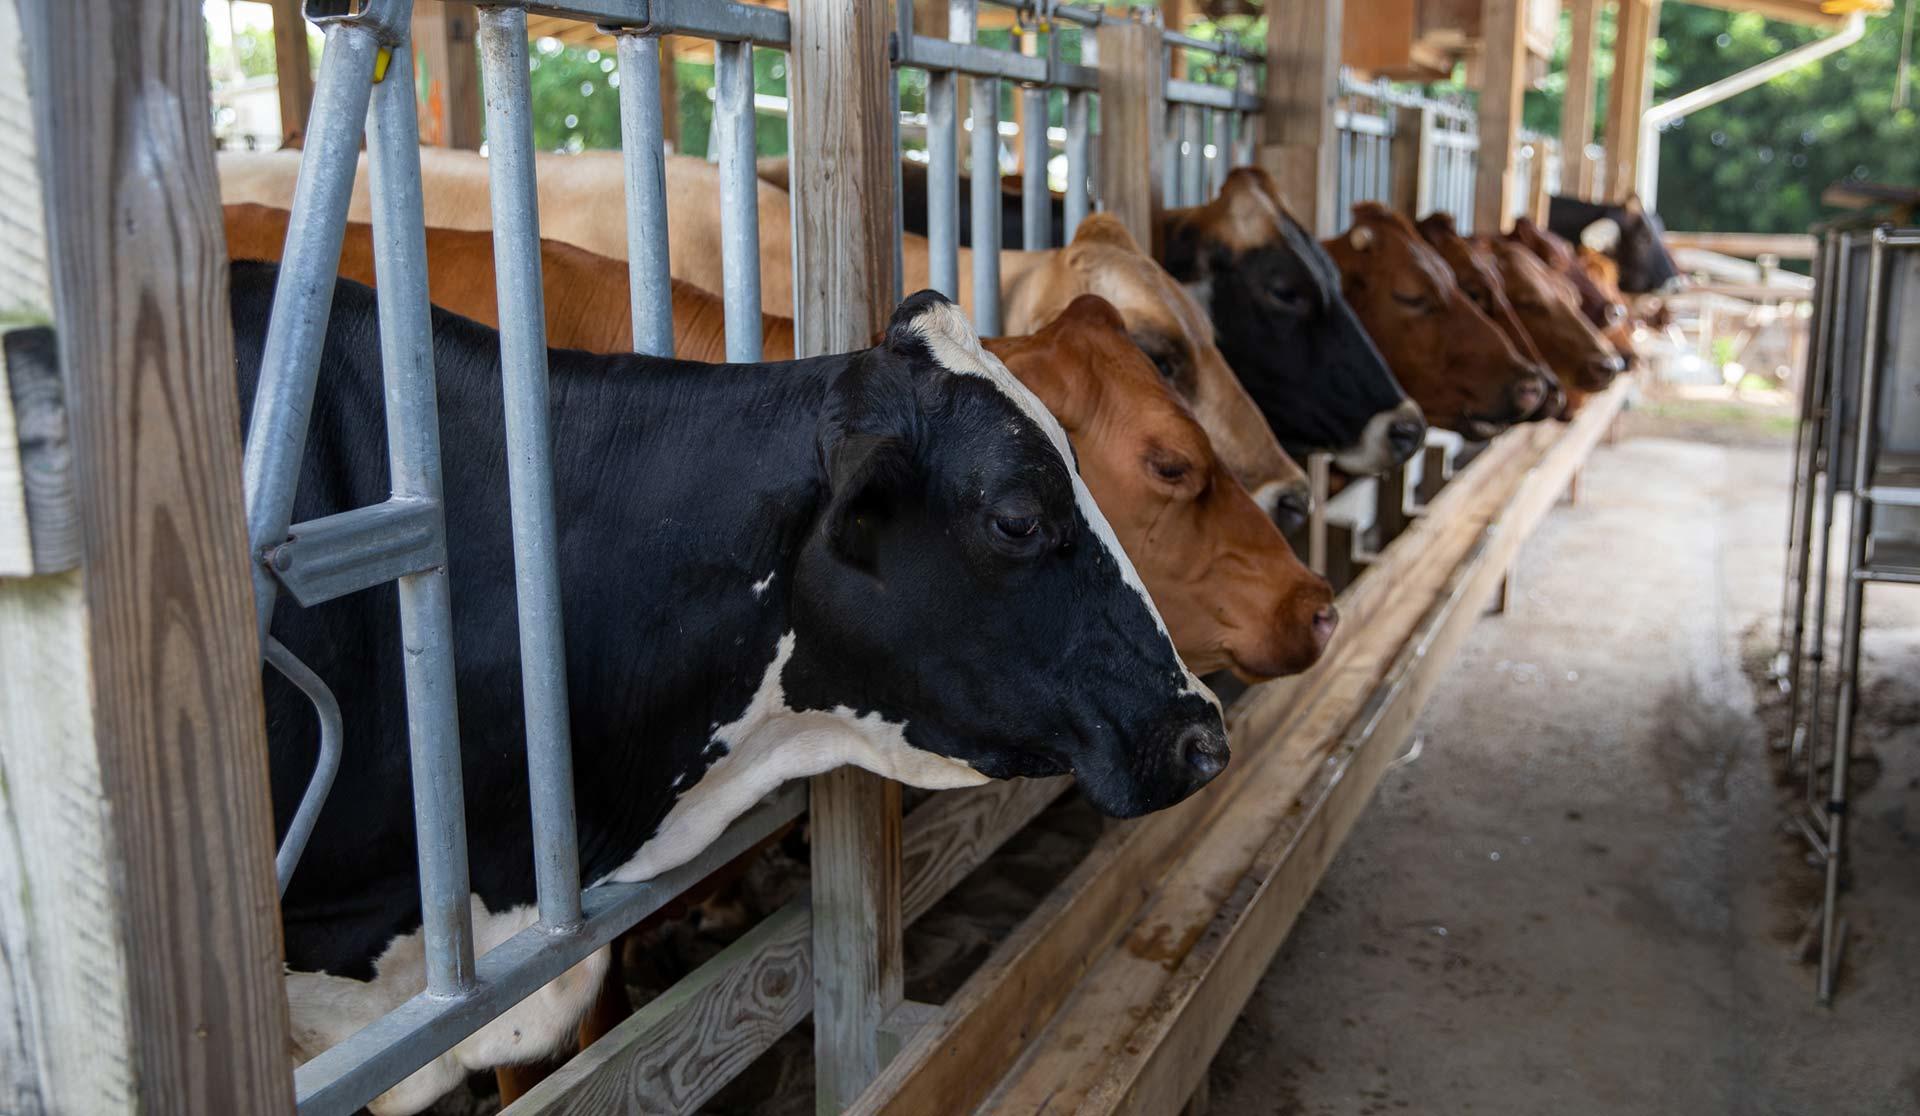 A herd of cows in their farm stalls